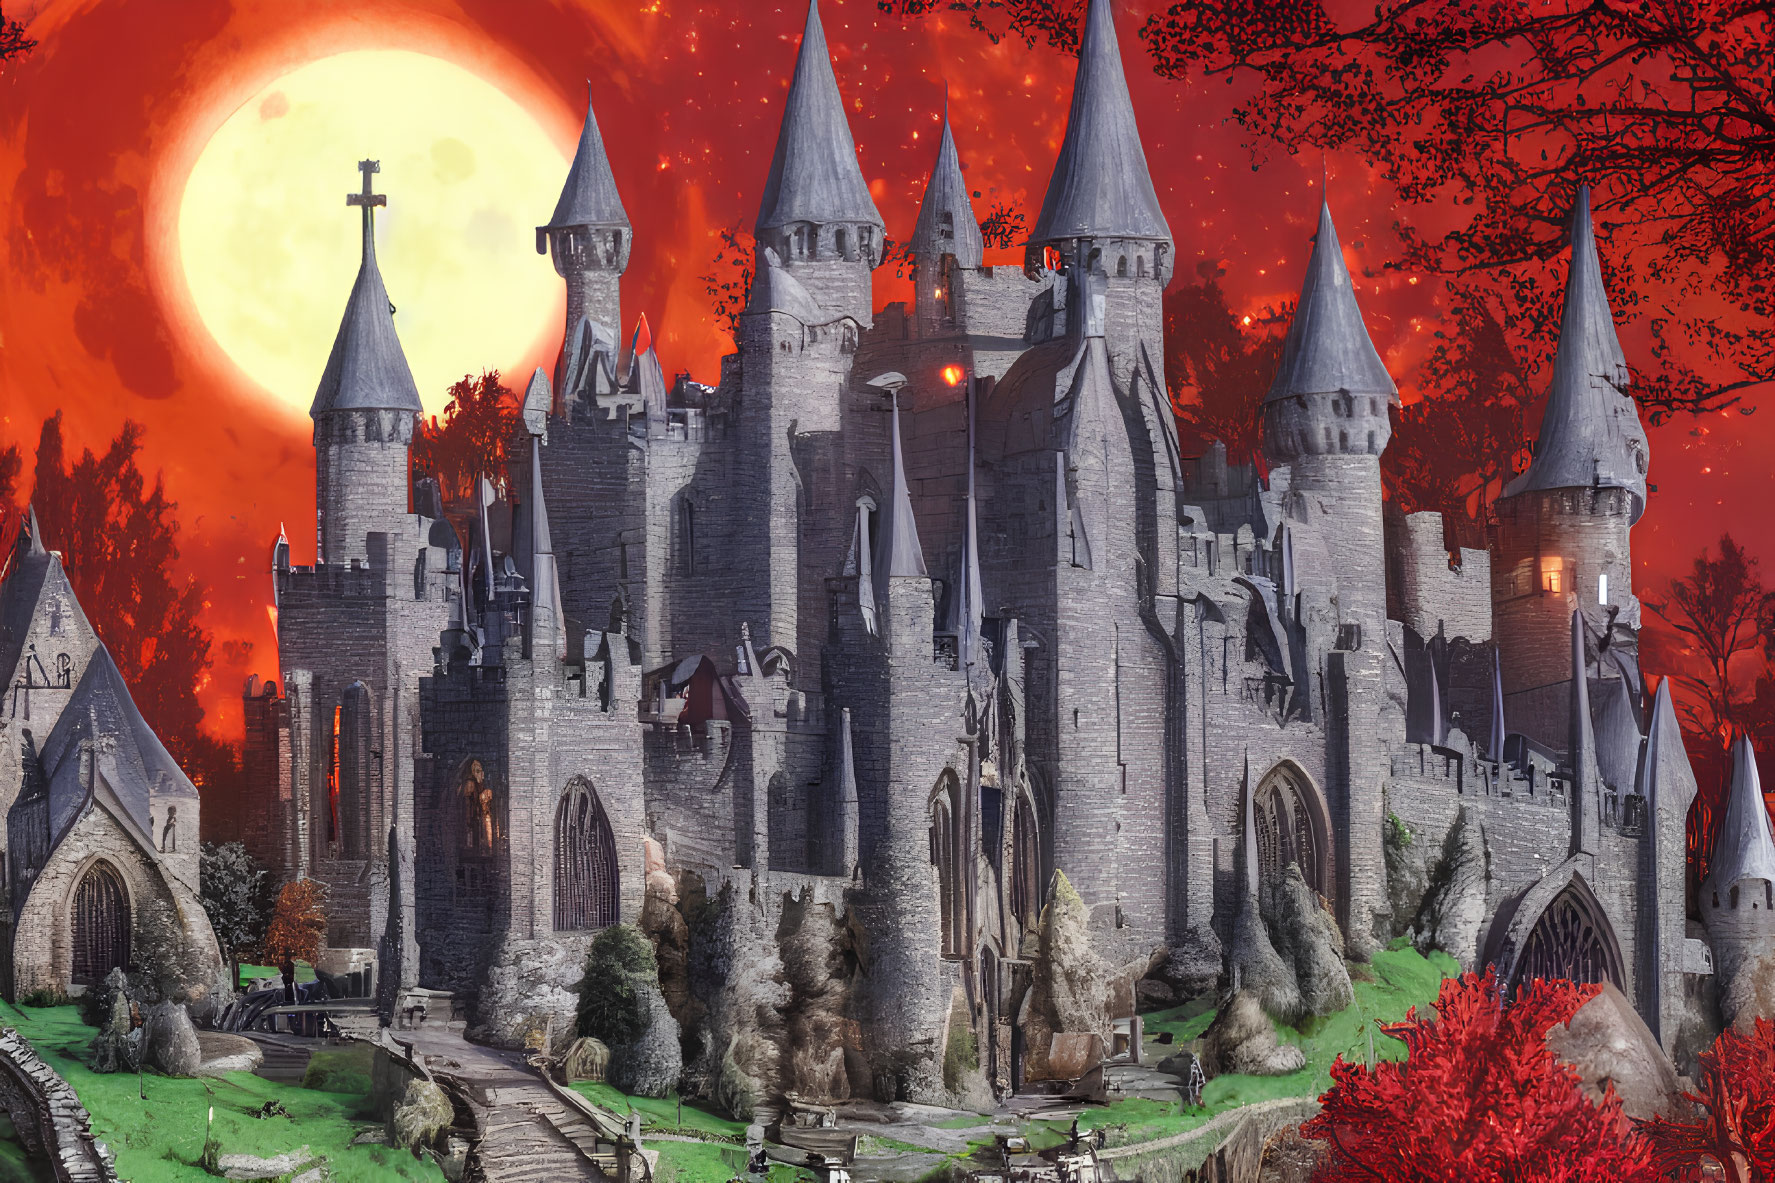 Medieval castle with spires under full moon in red sky and autumn forest.